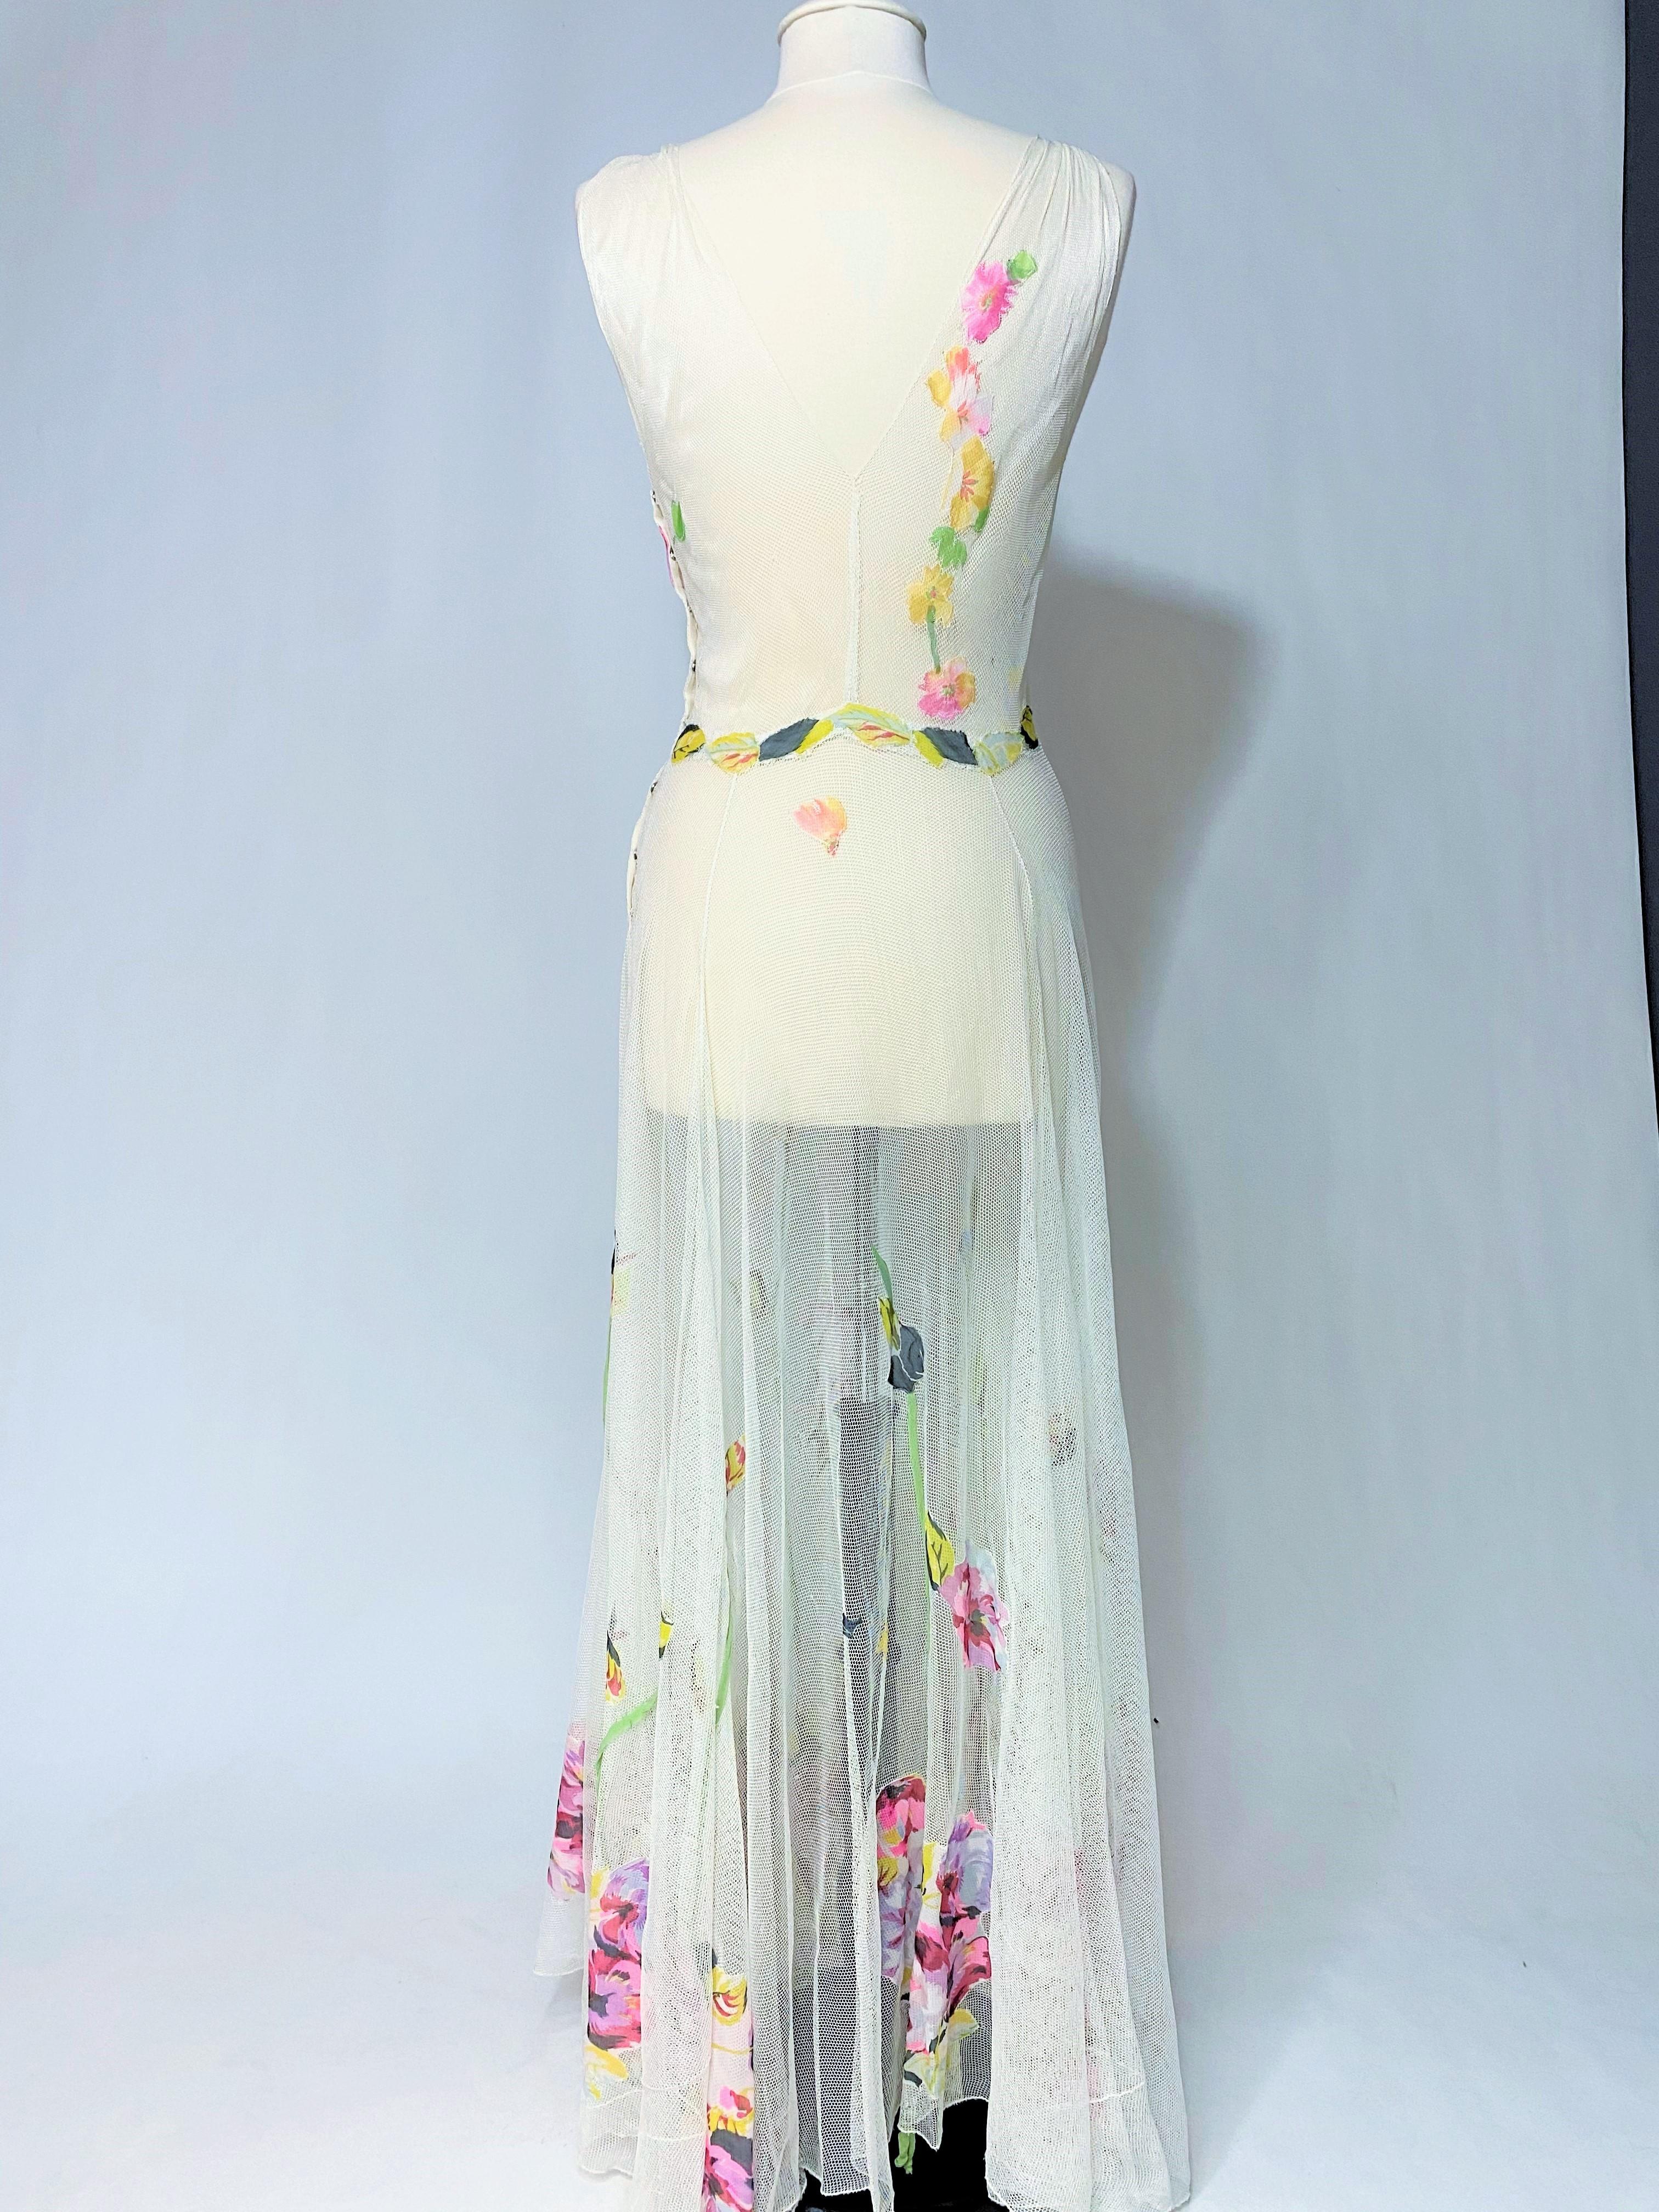 A Romantic Dress in white cotton Net applied with printed Chiffon Circa 1938 For Sale 11